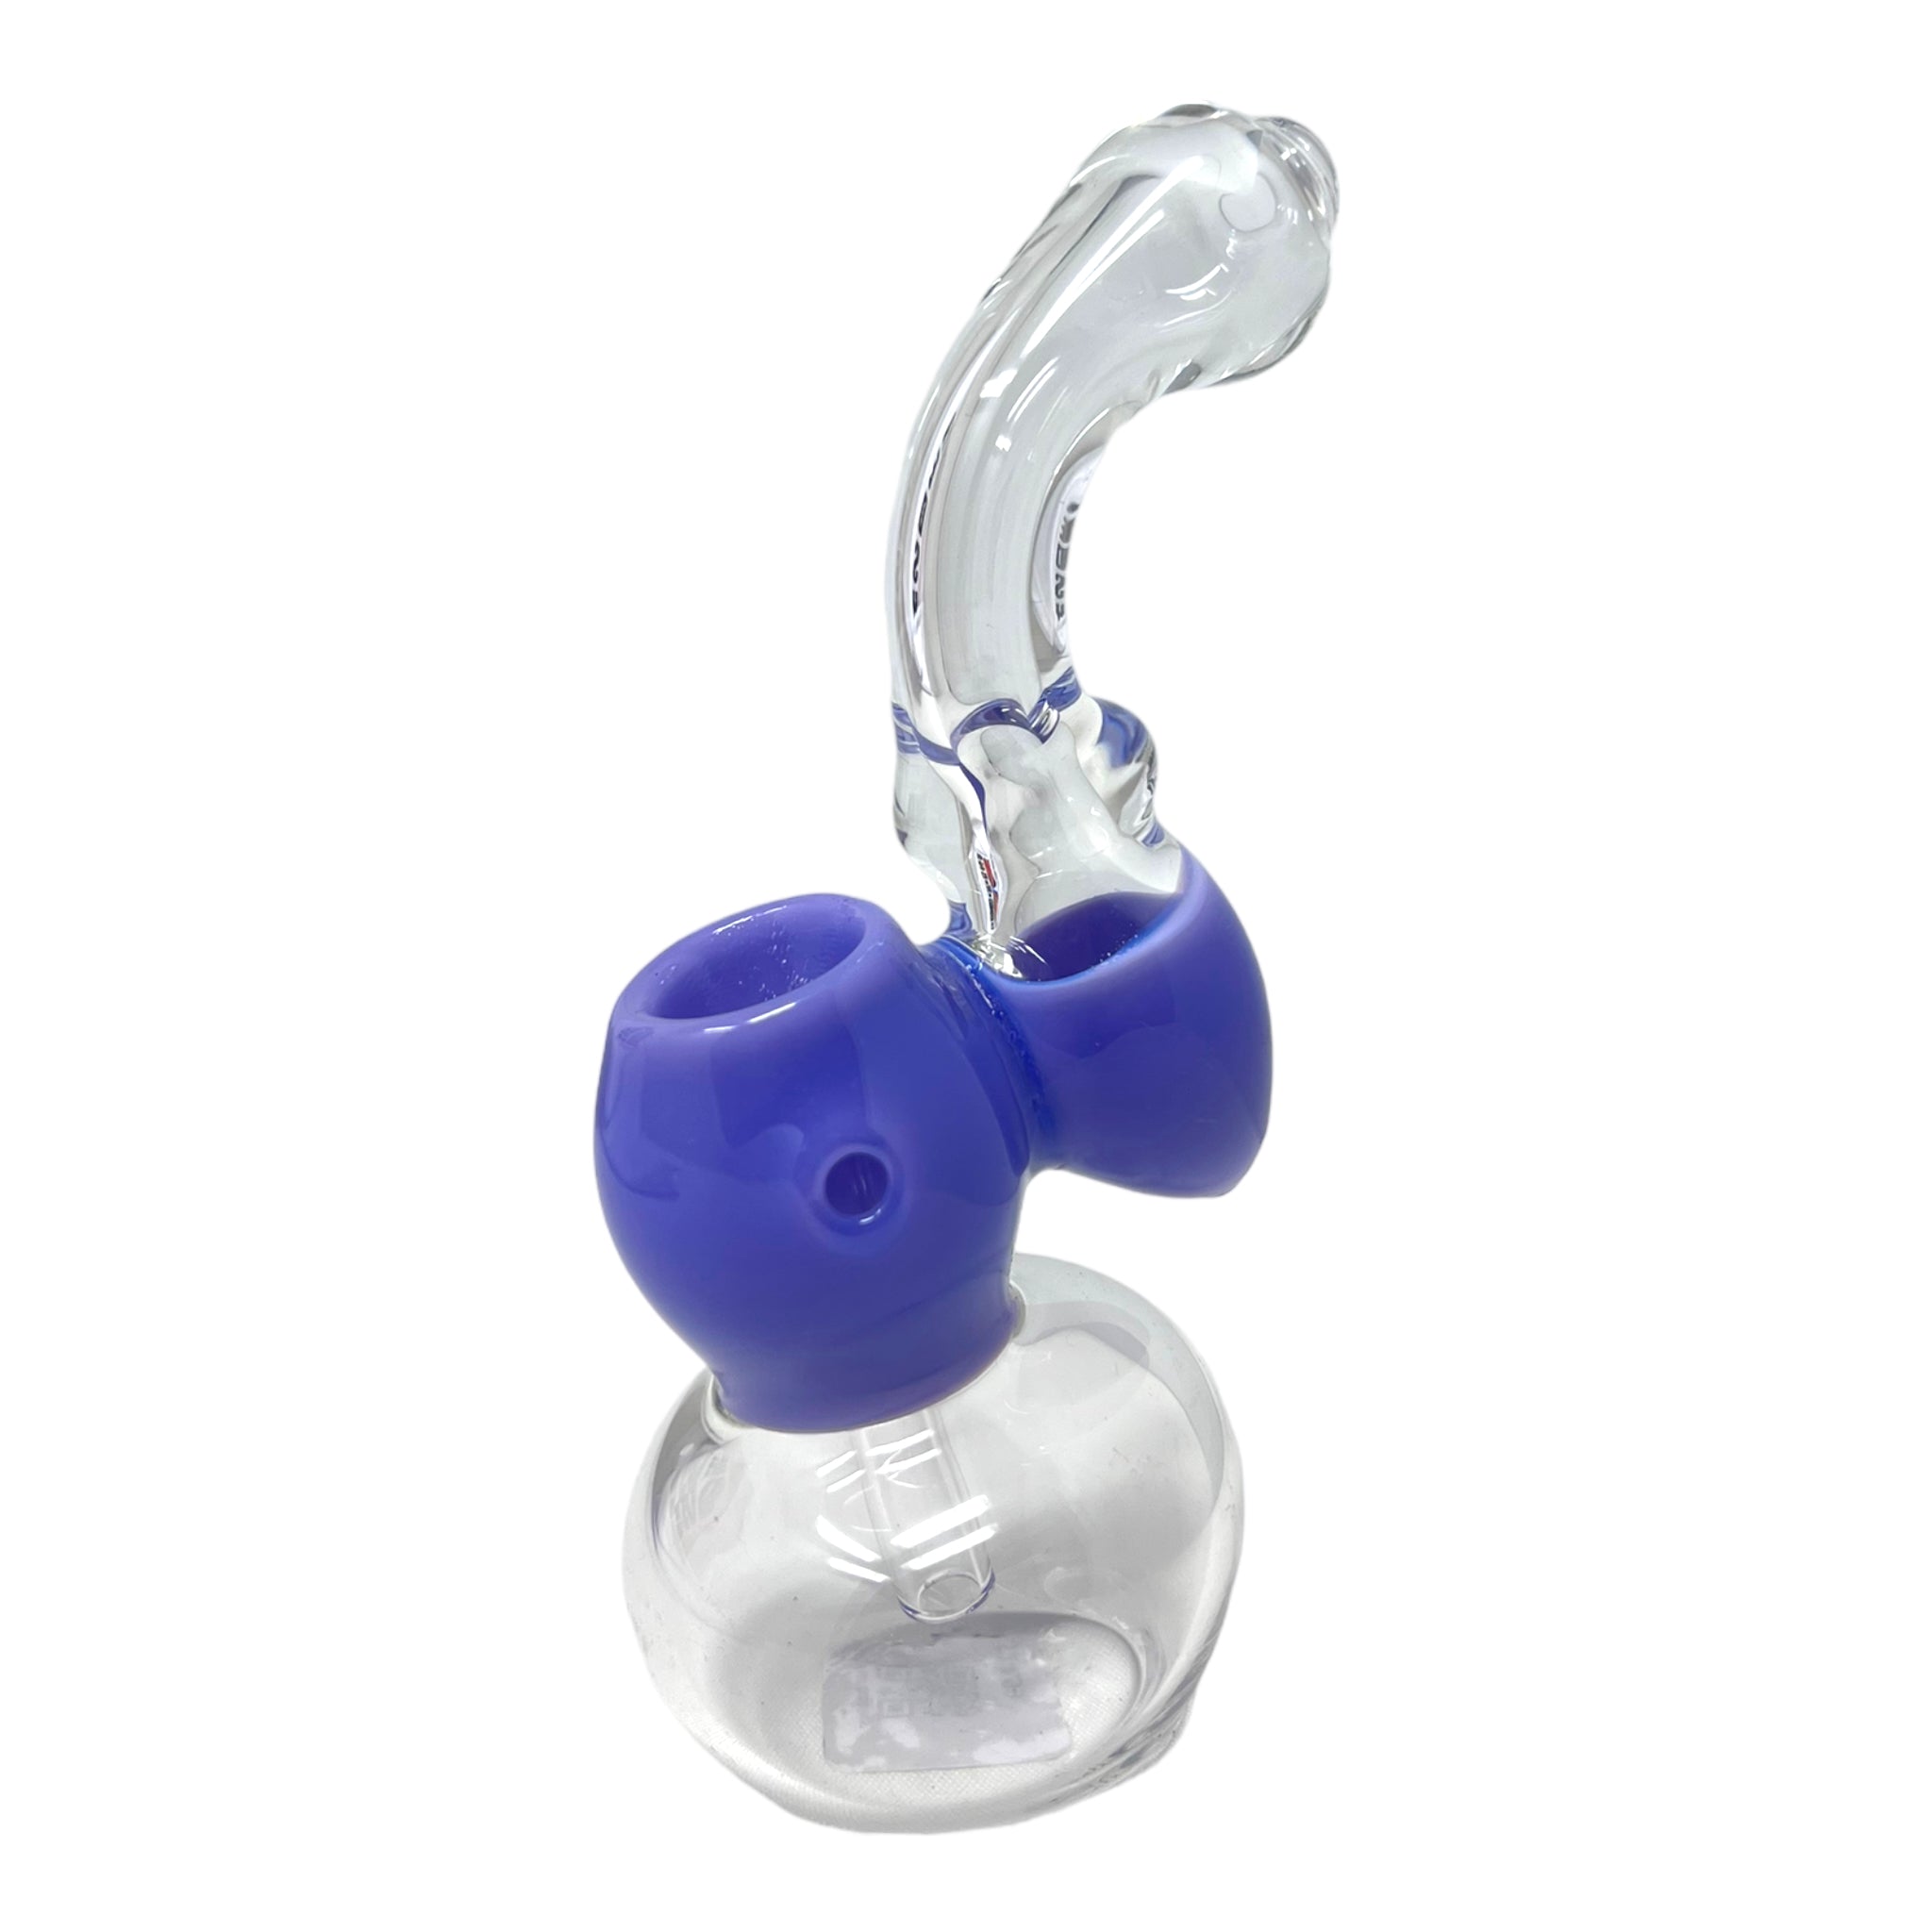 $25 Hand Bubblers